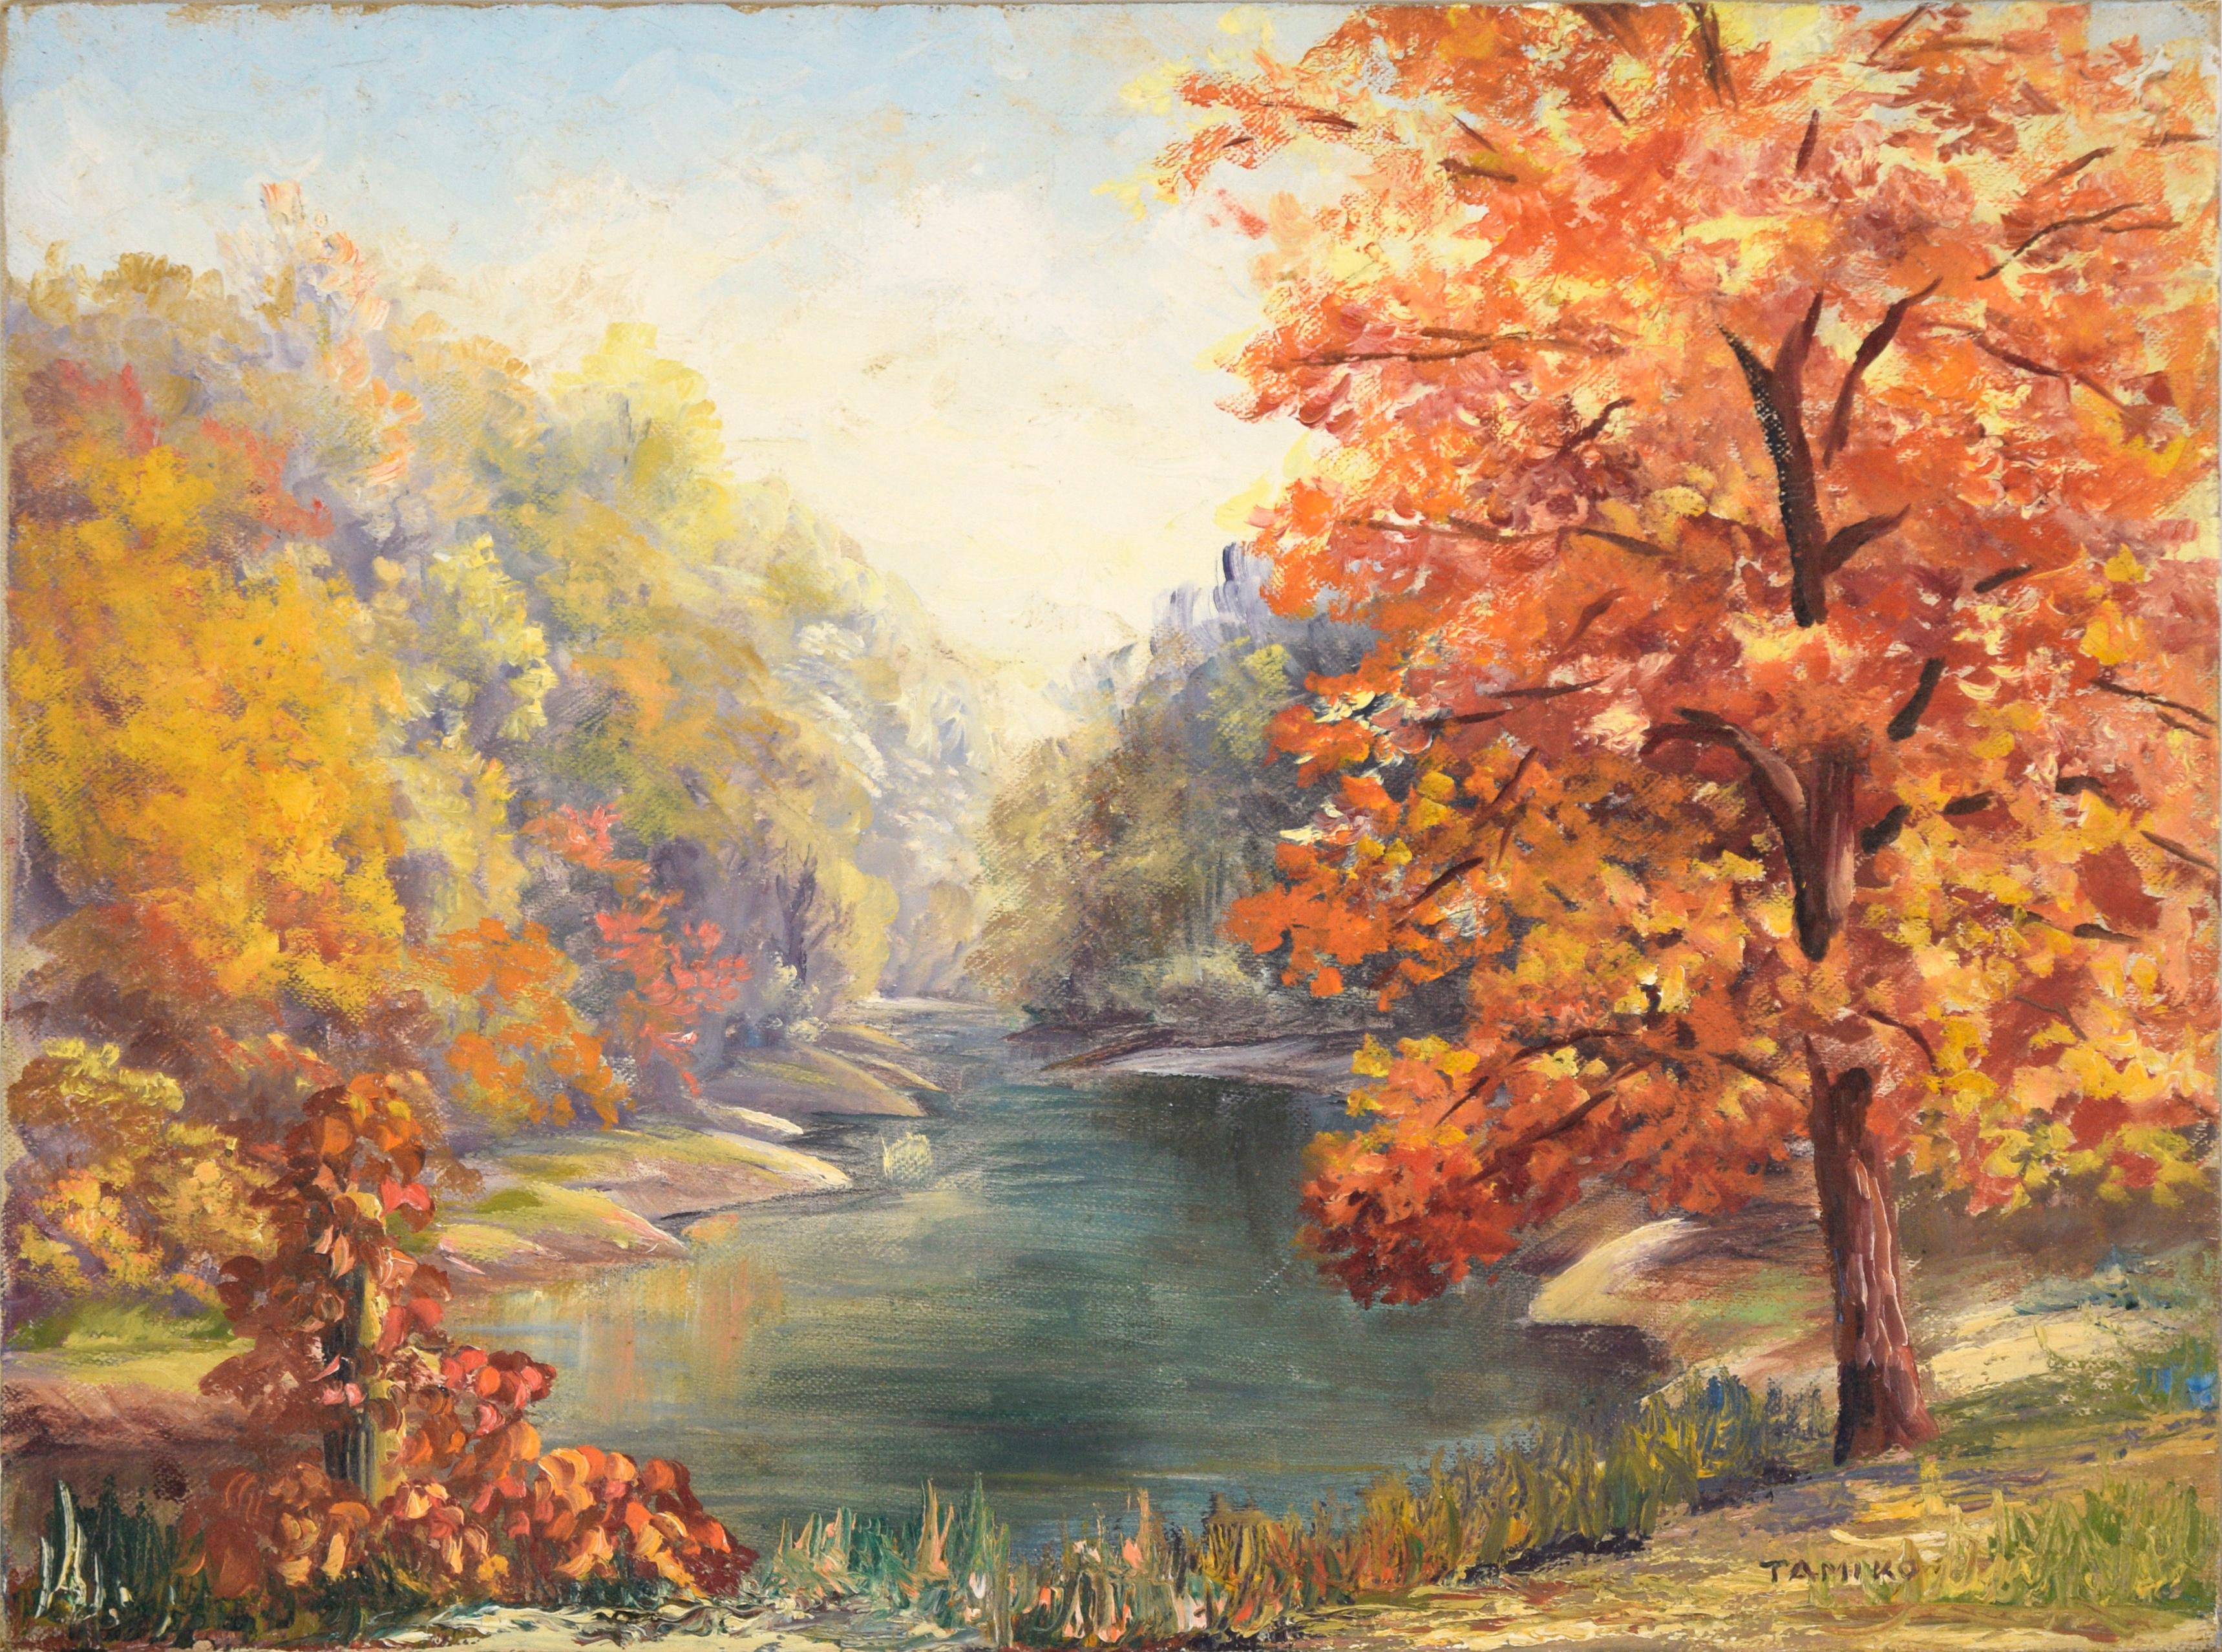 Autumn by the Stream - Landscape